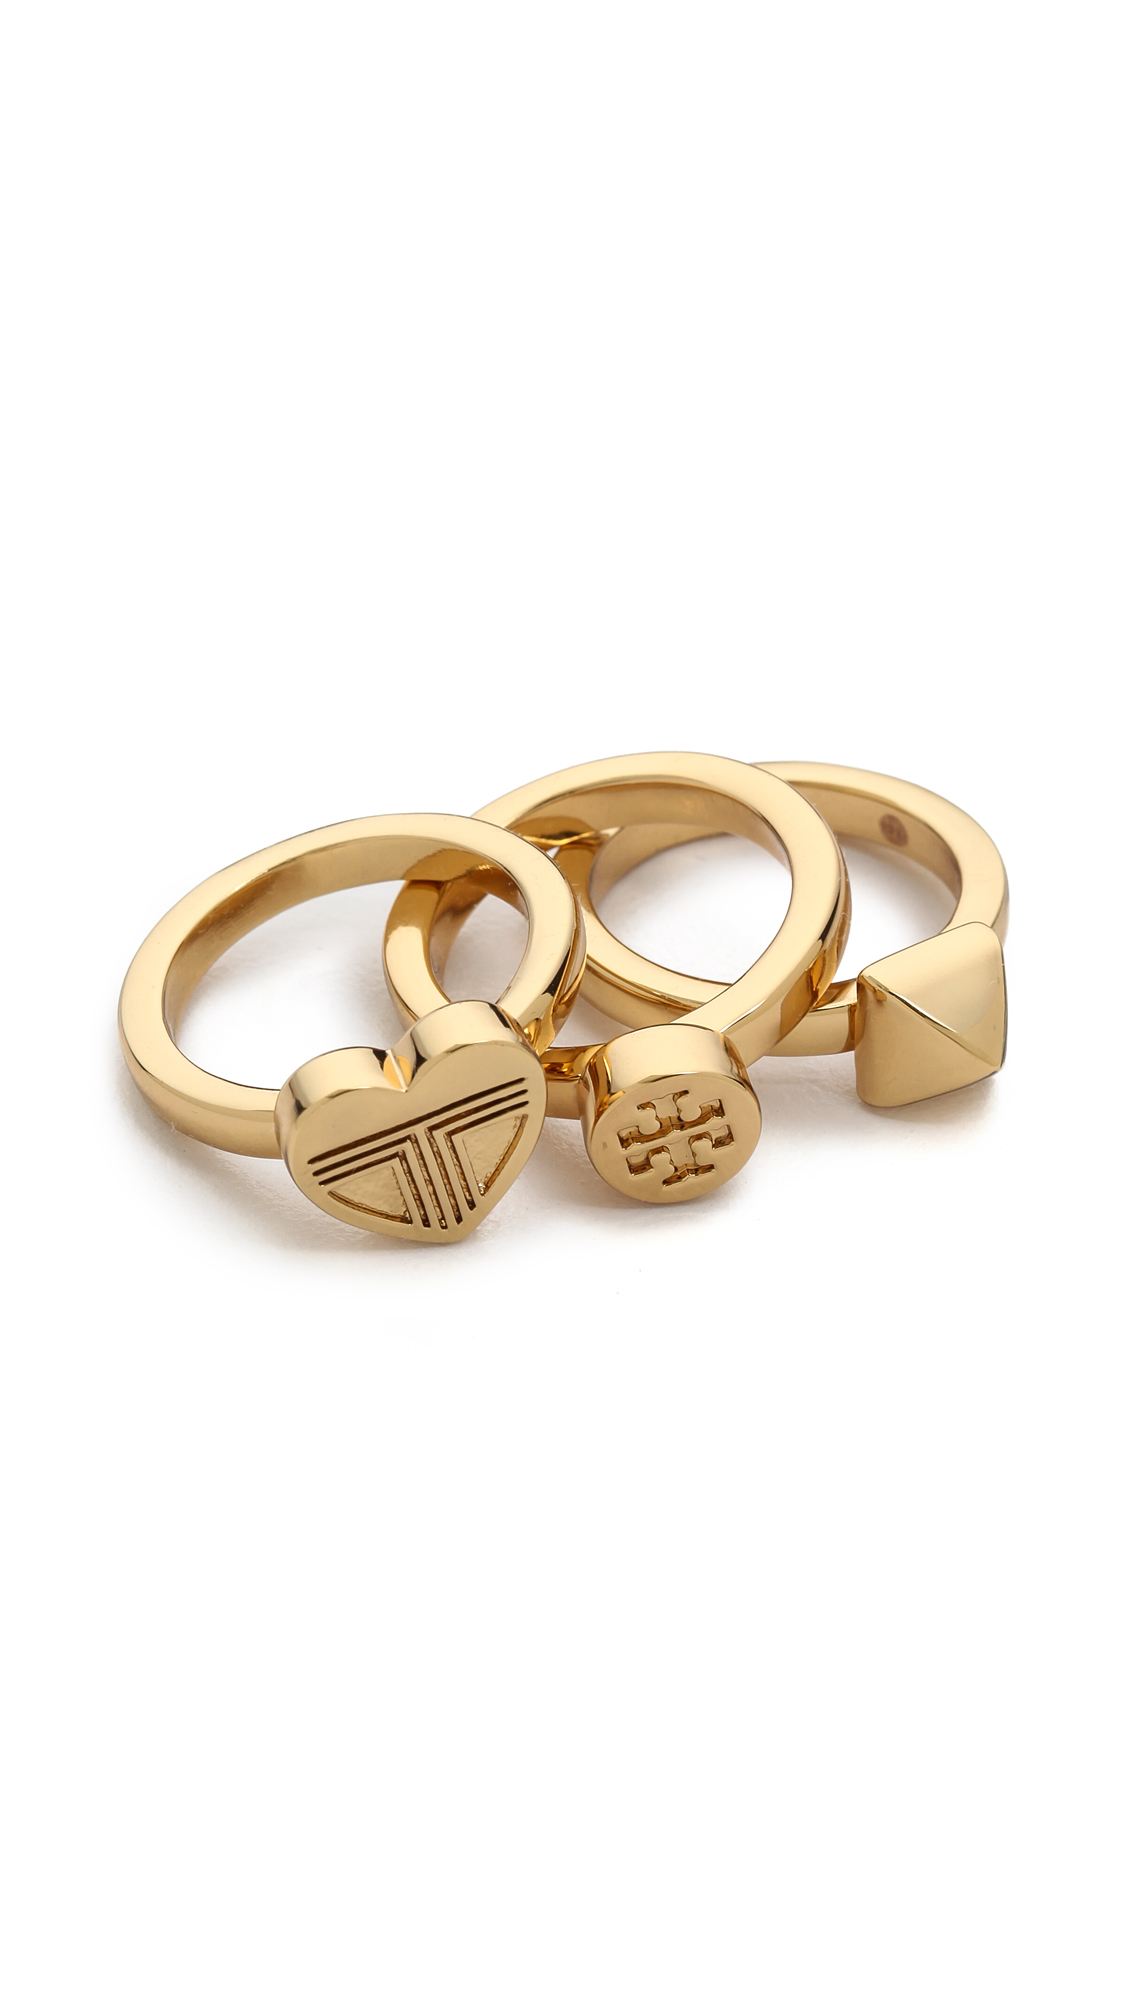 Lyst Tory Burch Adeline Stackable Rings Shiny Gold in Metallic